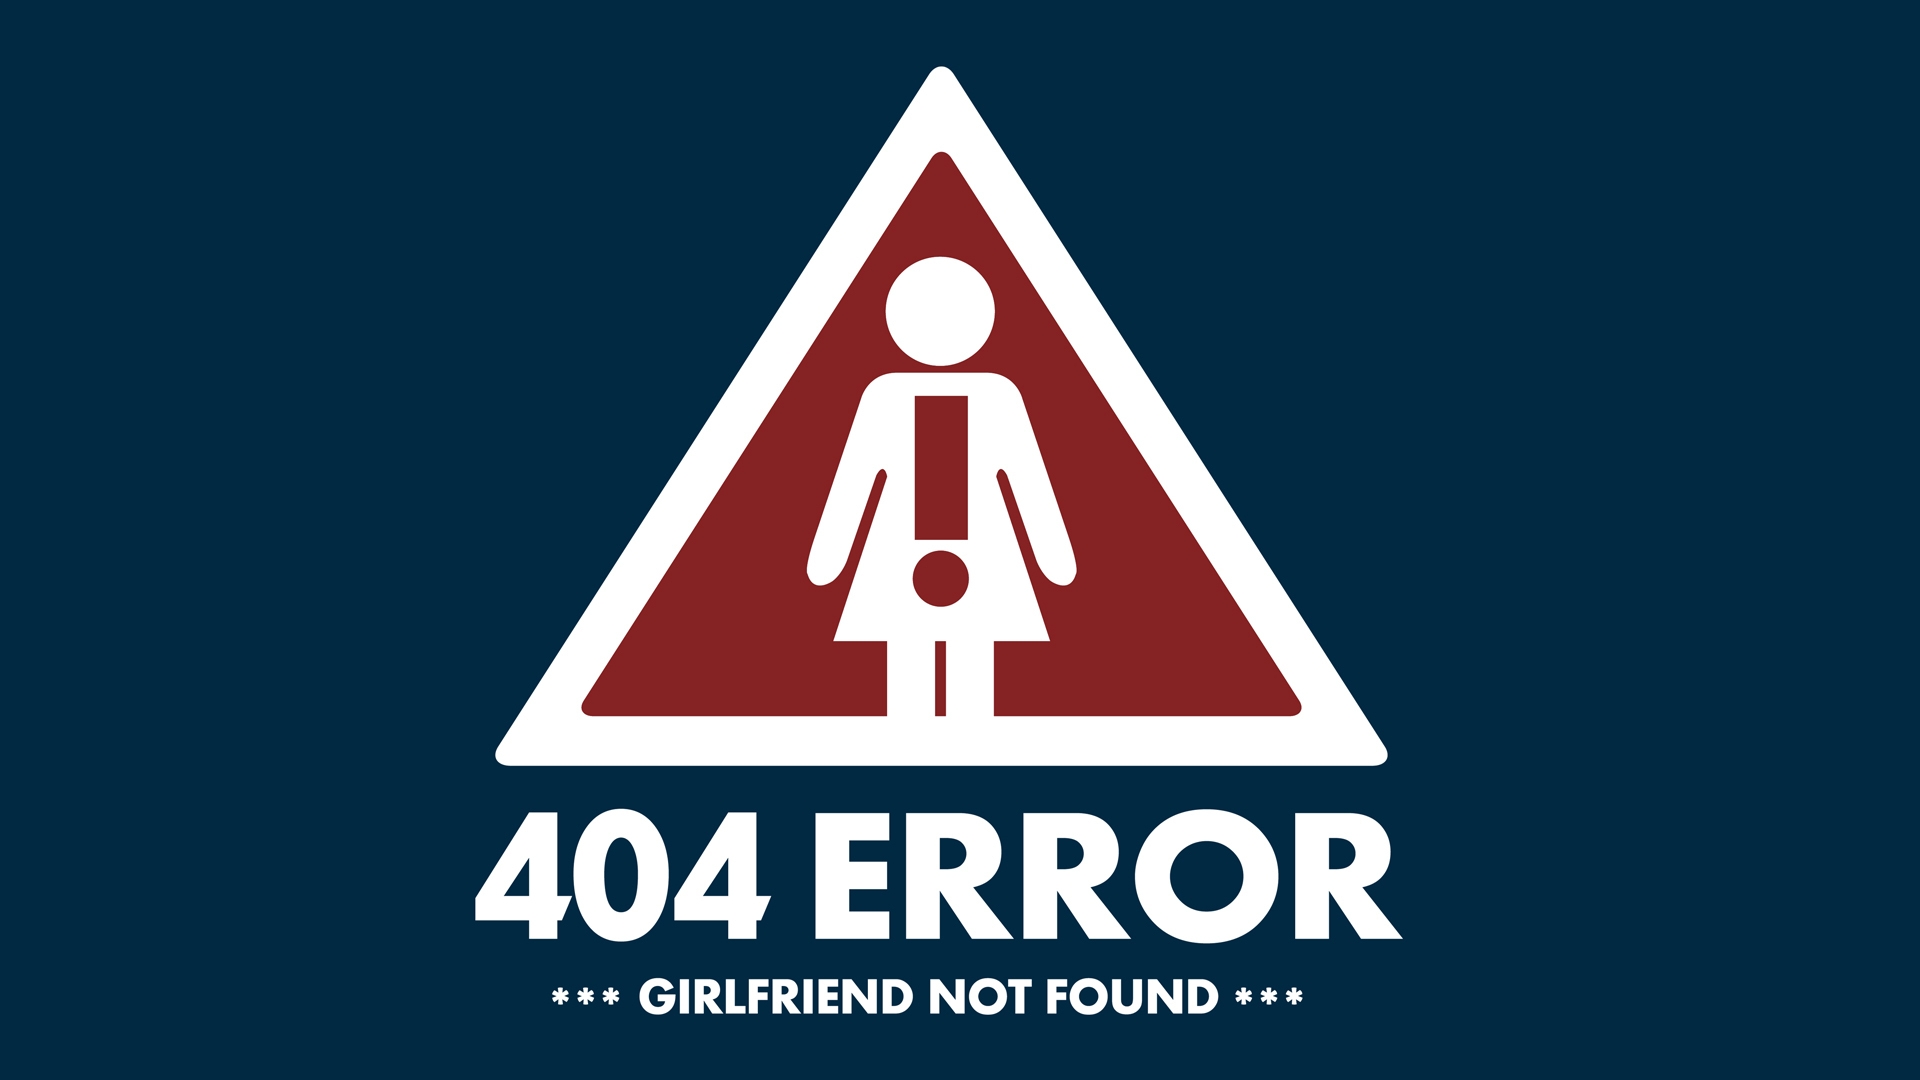 404 Error Page for 1920 x 1080 HDTV 1080p resolution